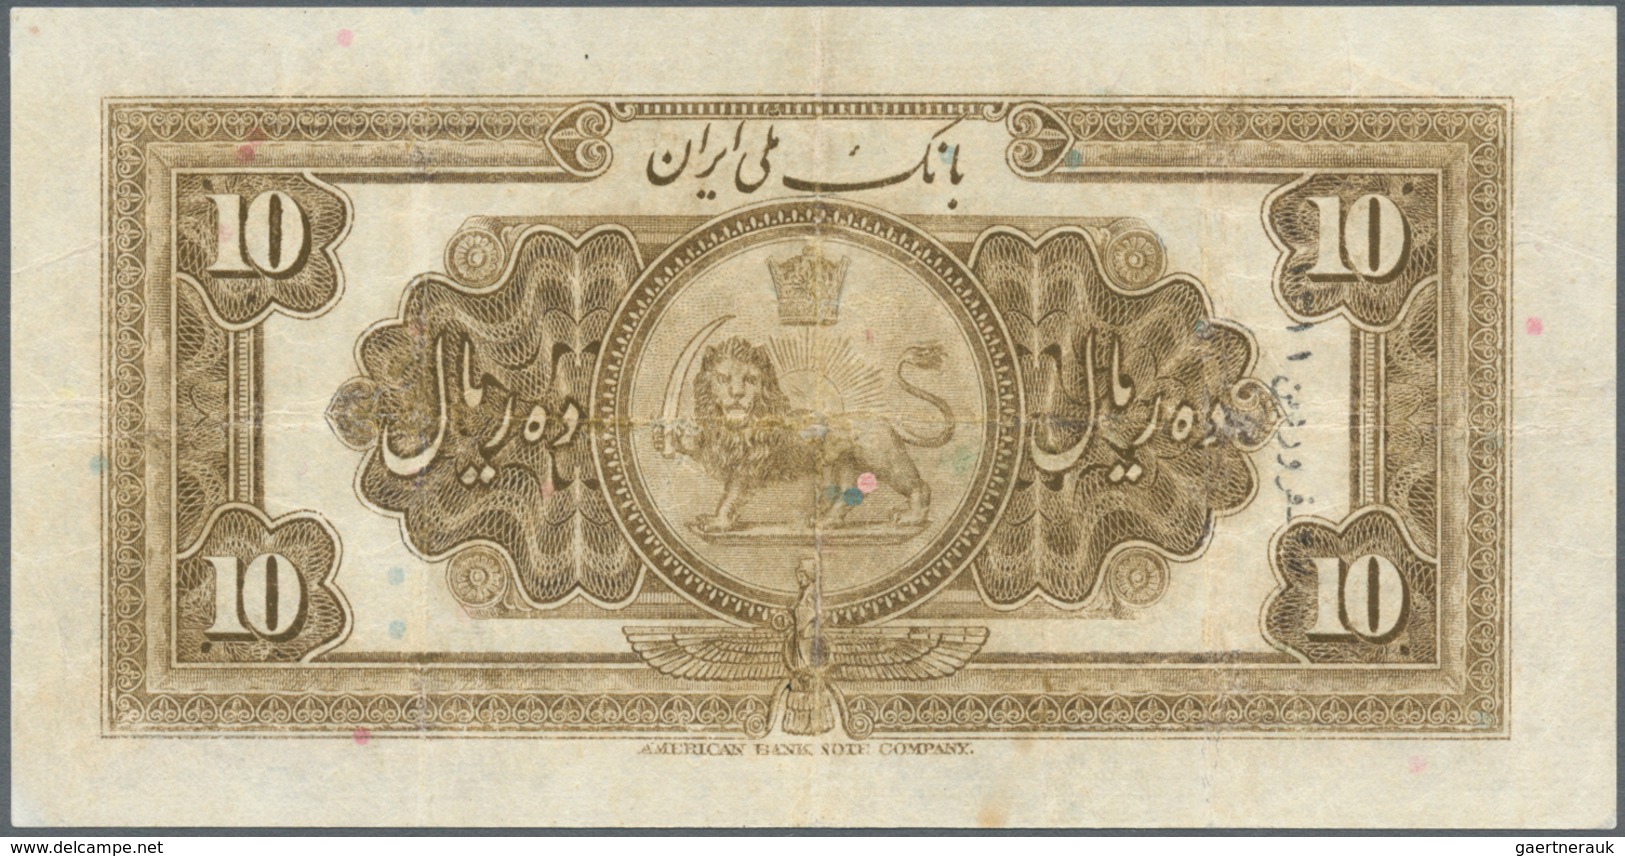 Iran: 10 Rials ND P. 19, Used With Folds, Washed And Pressed But No Damages, Still Nice Colors, Cond - Iran